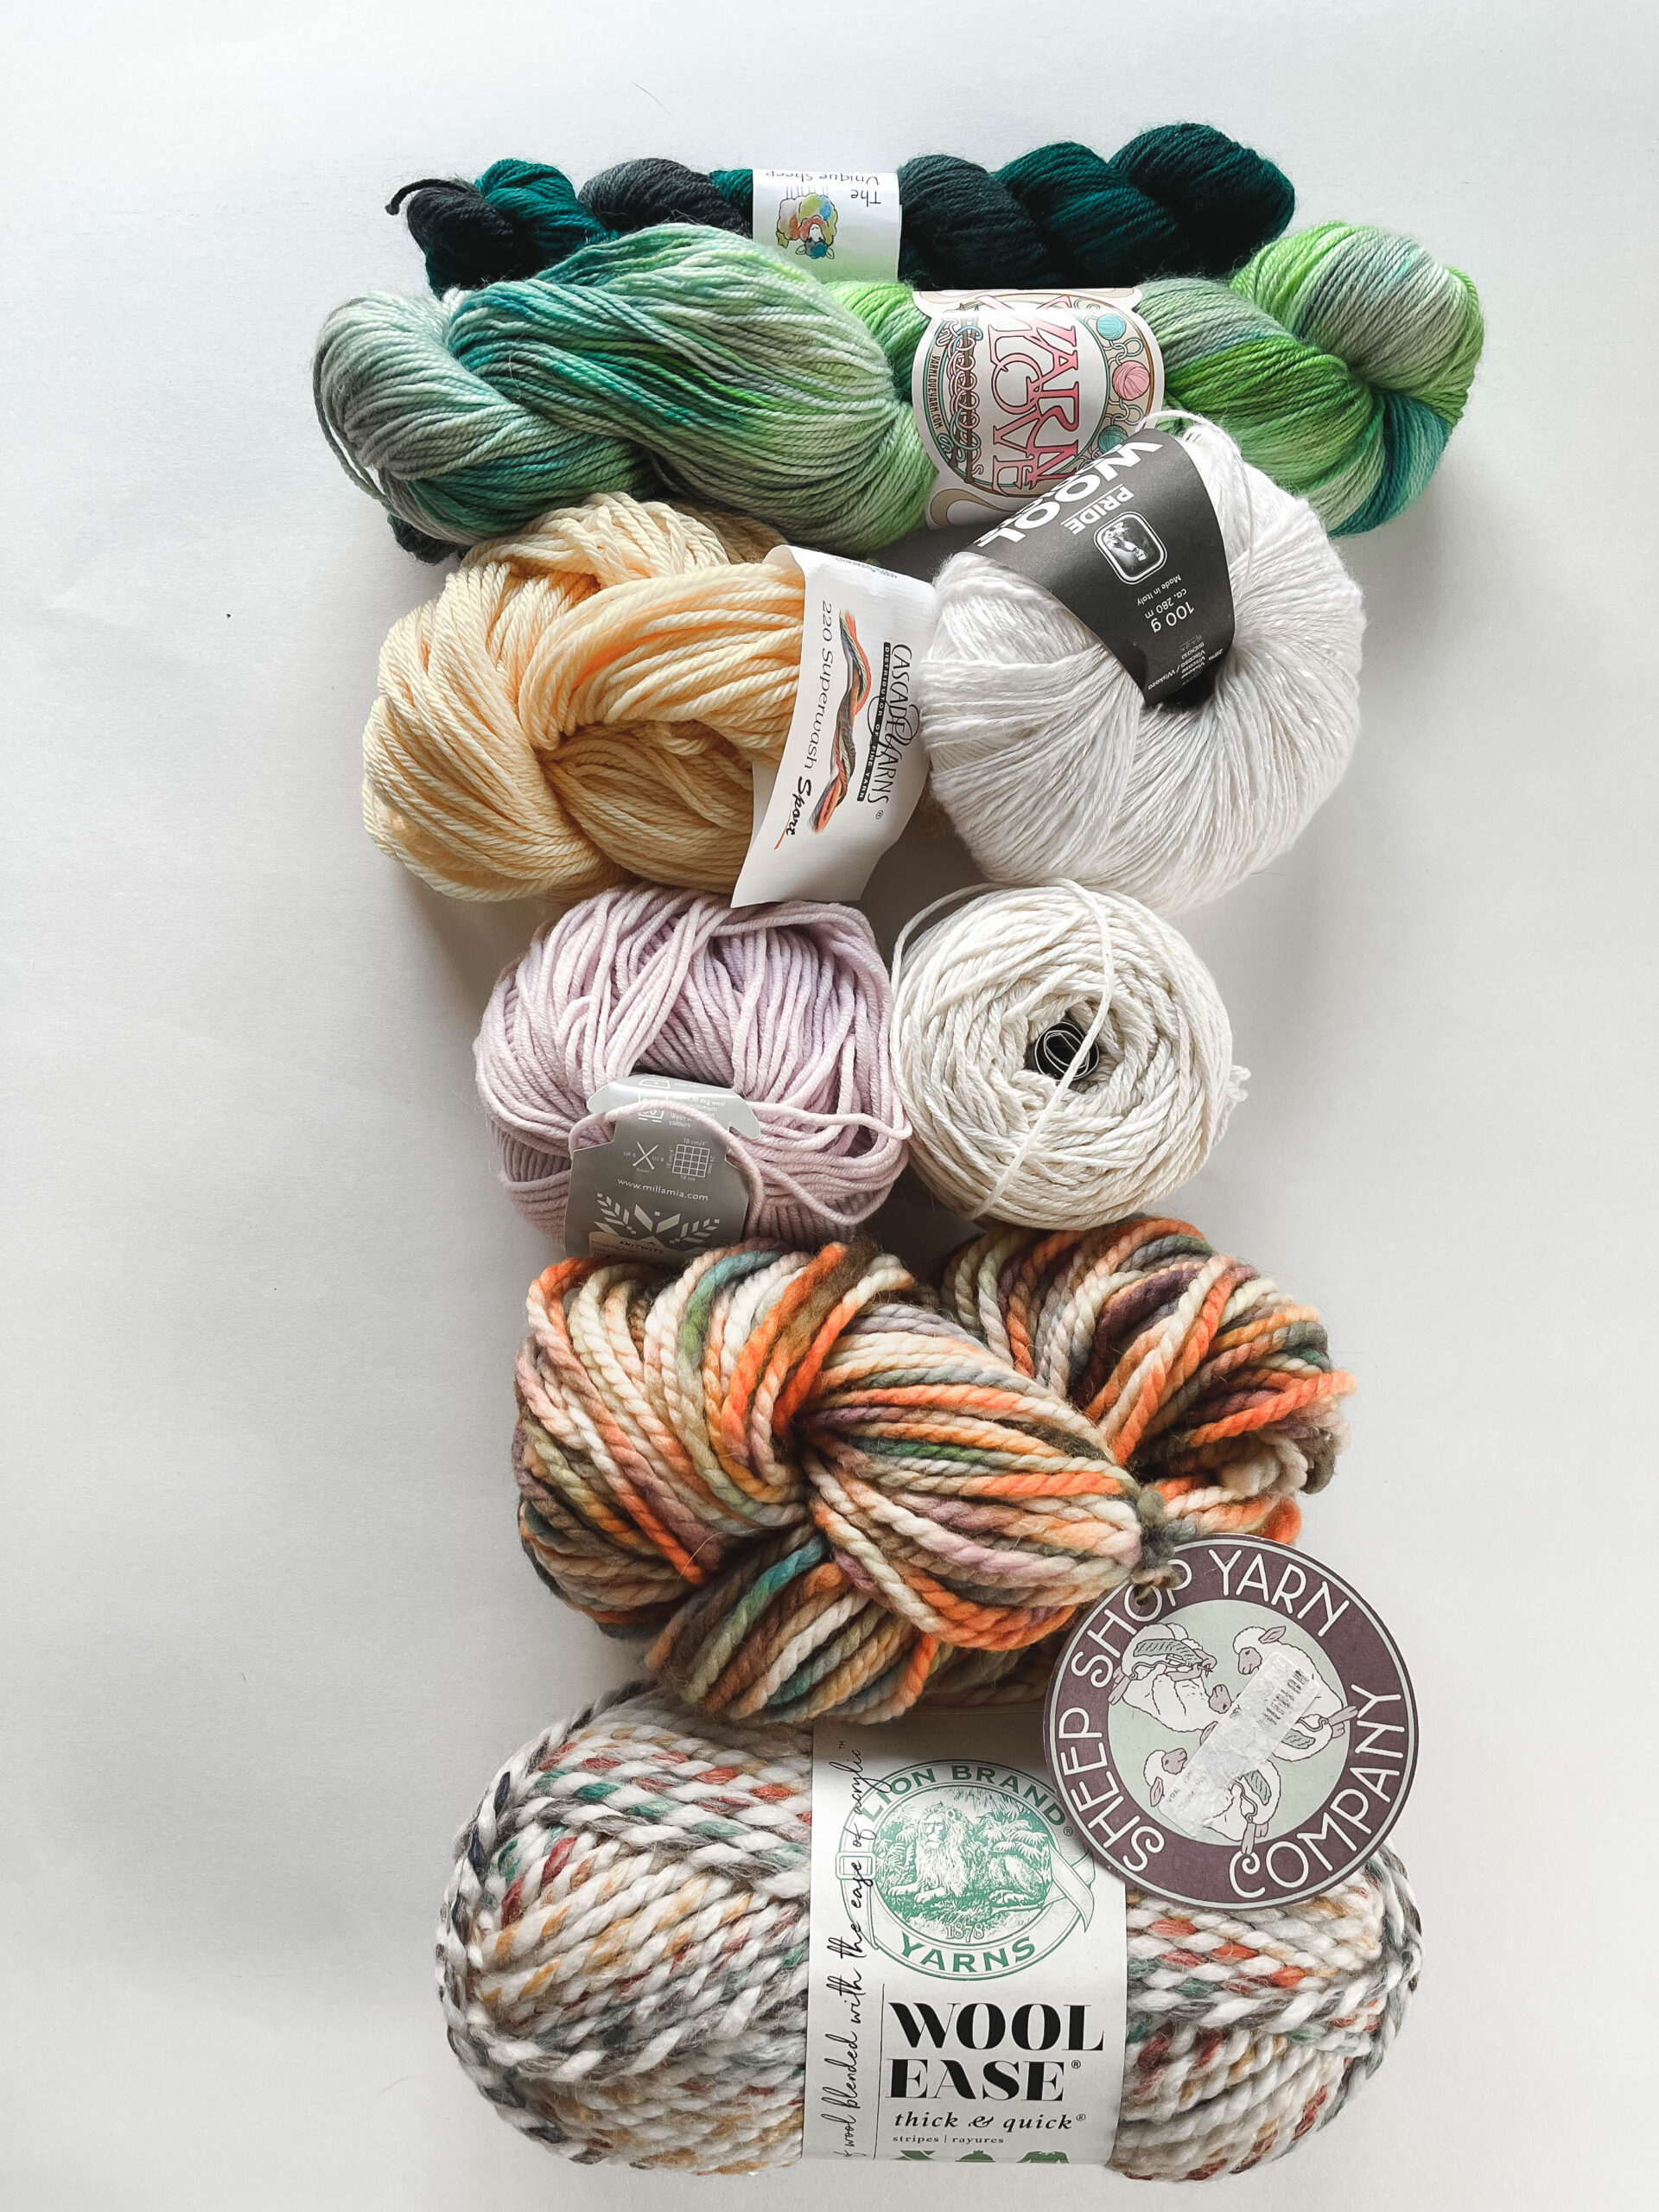 Knitting 101: How to choose the right yarn by reading a yarn label